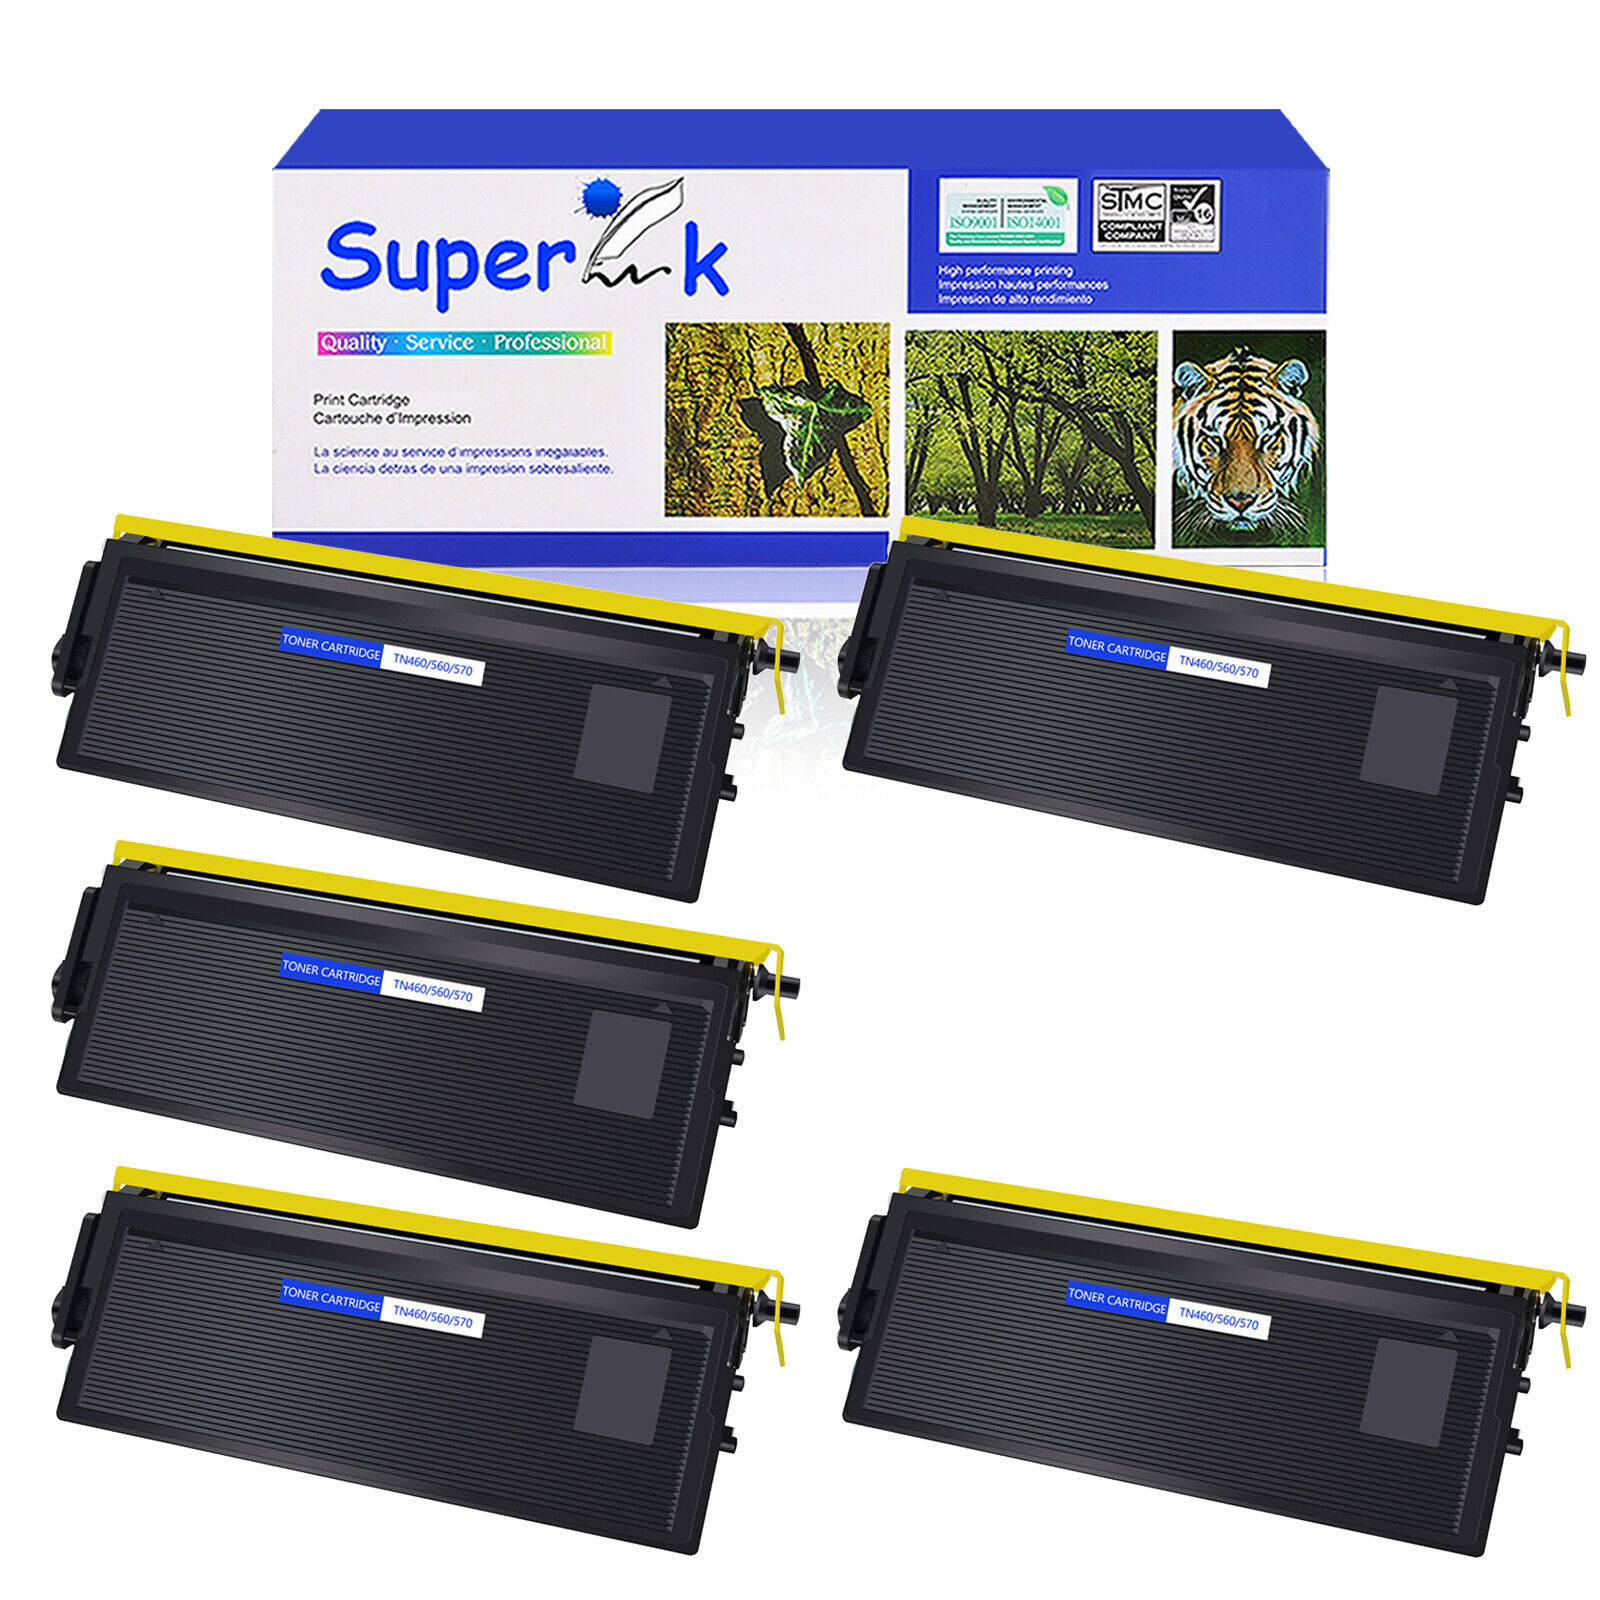 5 PACK - TN460 Toner for Brother TN-460 MFC-9750 MFC-9800 MFC-9850 MFC-9870